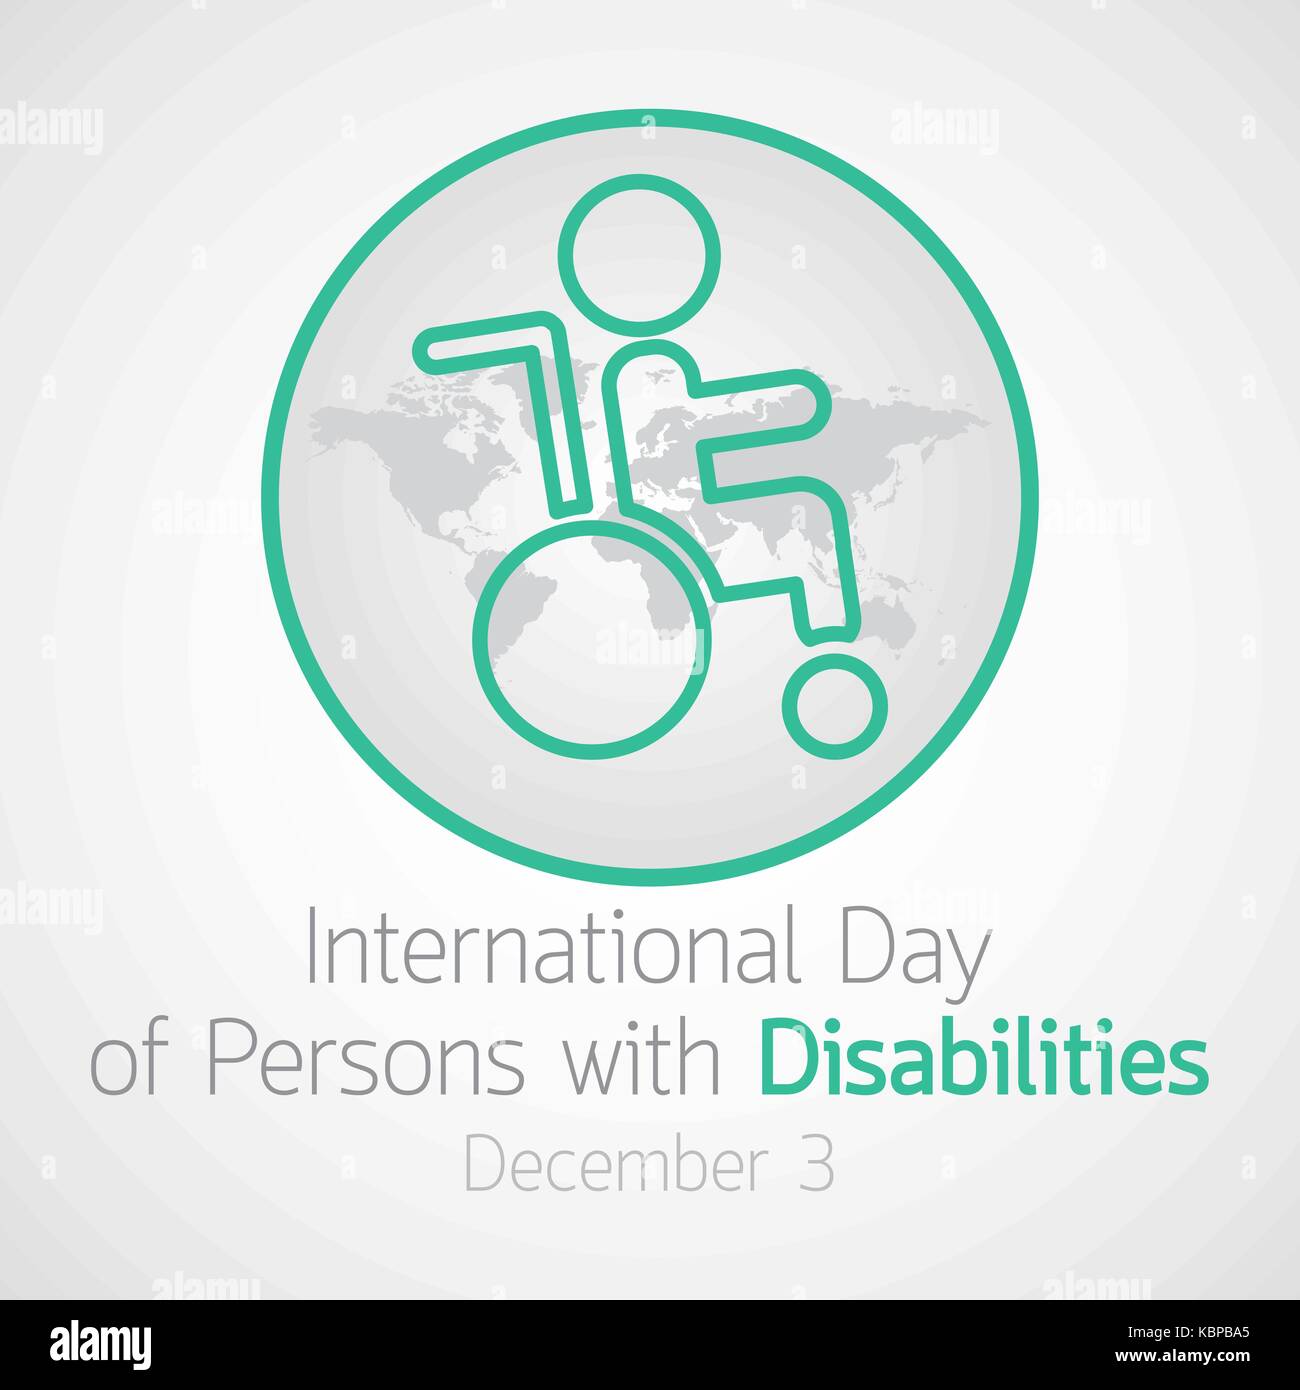 International Day of Persons with Disabilities vector icon illustration Stock Vector